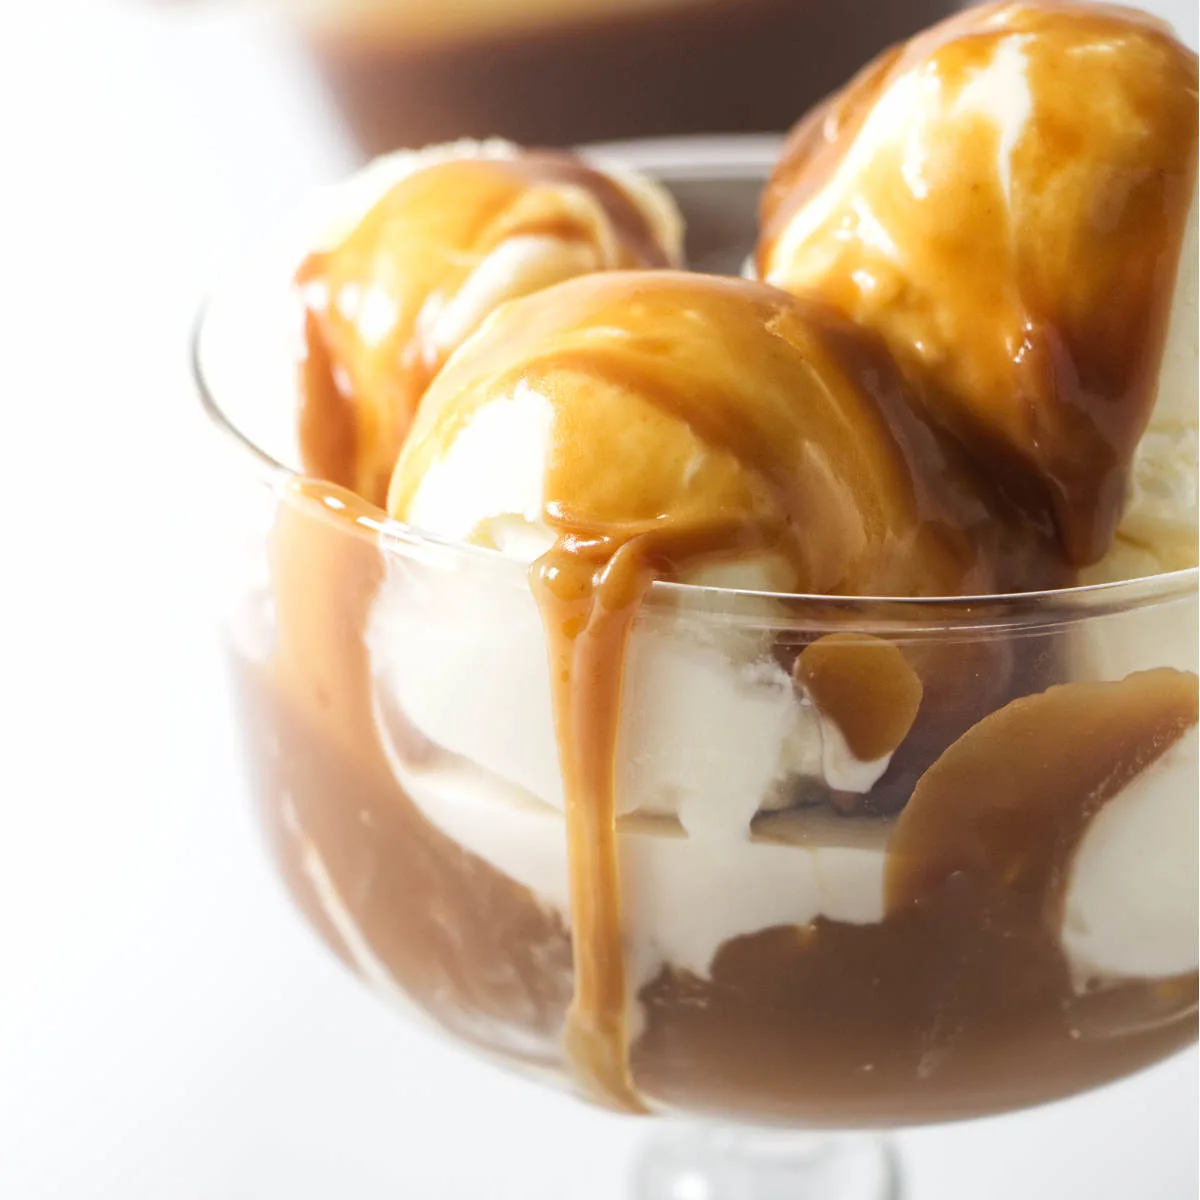 A bowl of ice cream with butterscotch sauce on top.